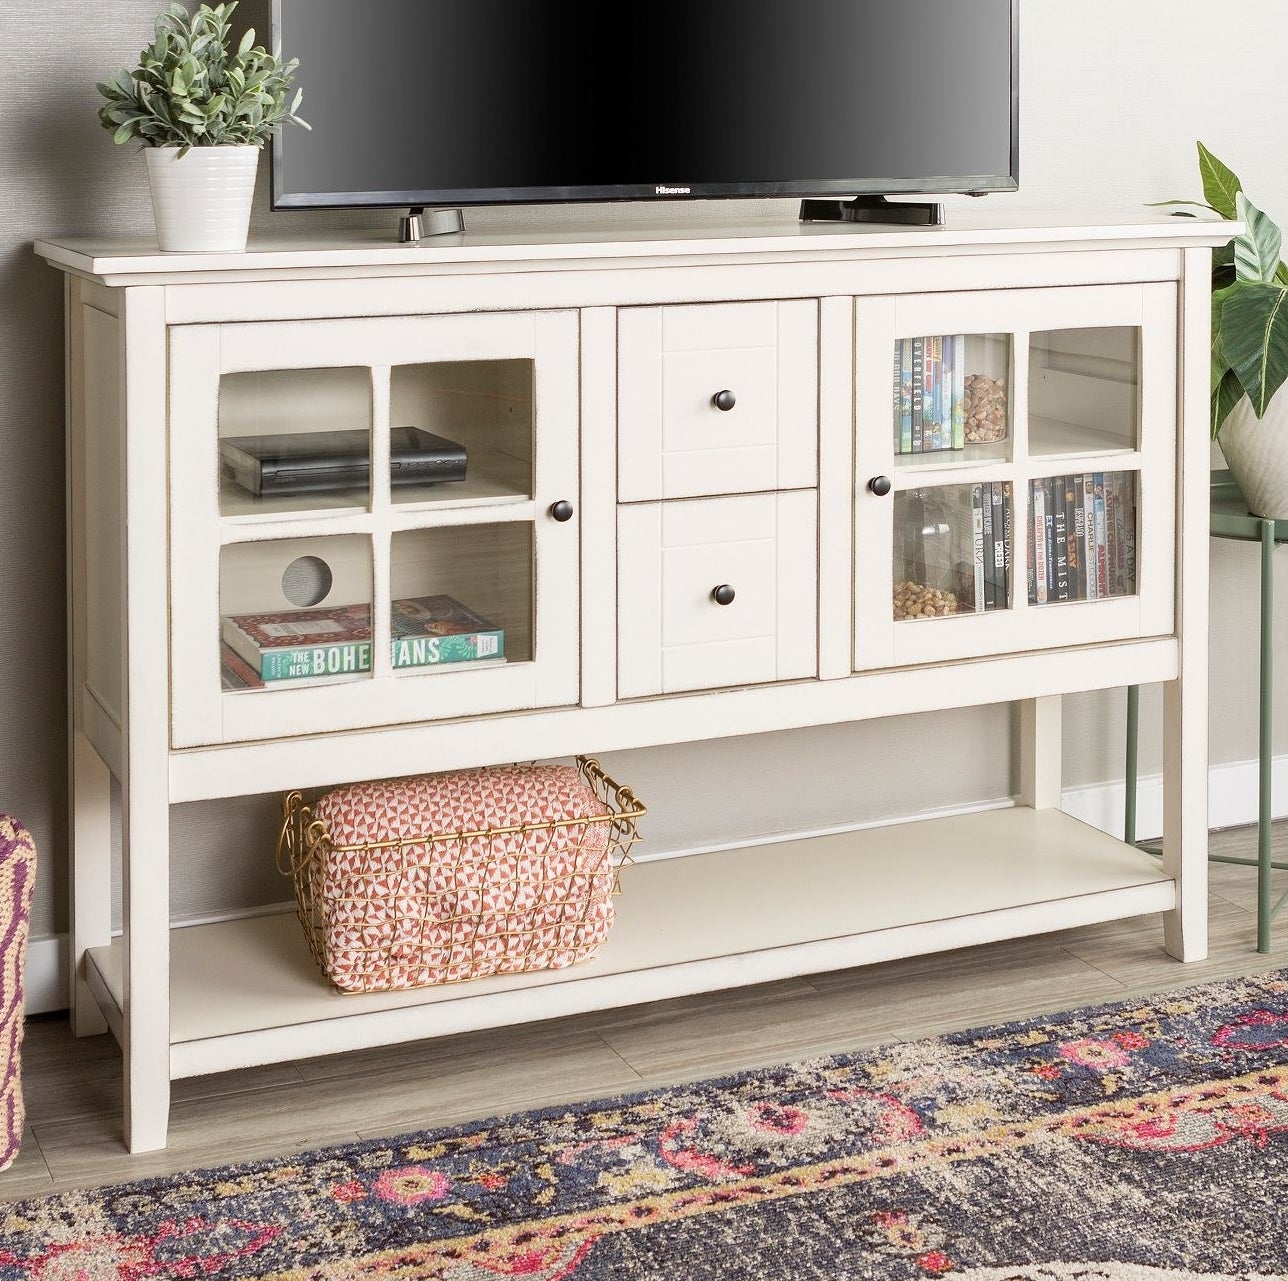 The TV stand with multiple items stored inside and a TV on top